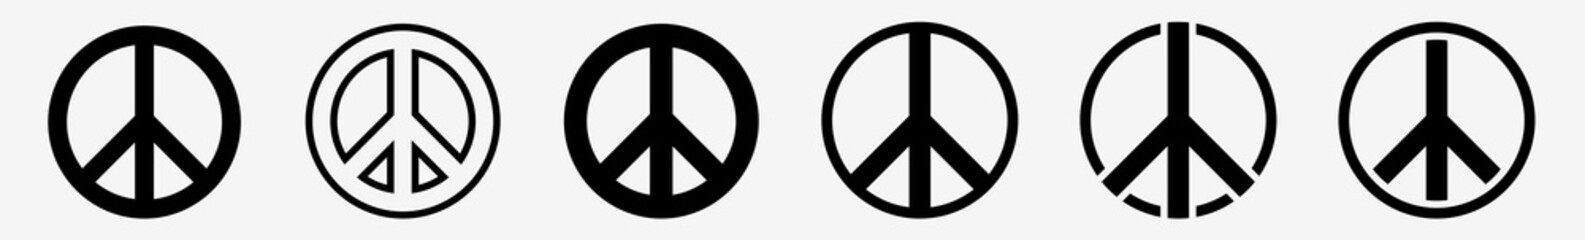 Peace Sign Icon Set | Peace Vector Illustration Logo | Peace Signs | Isolated Collection